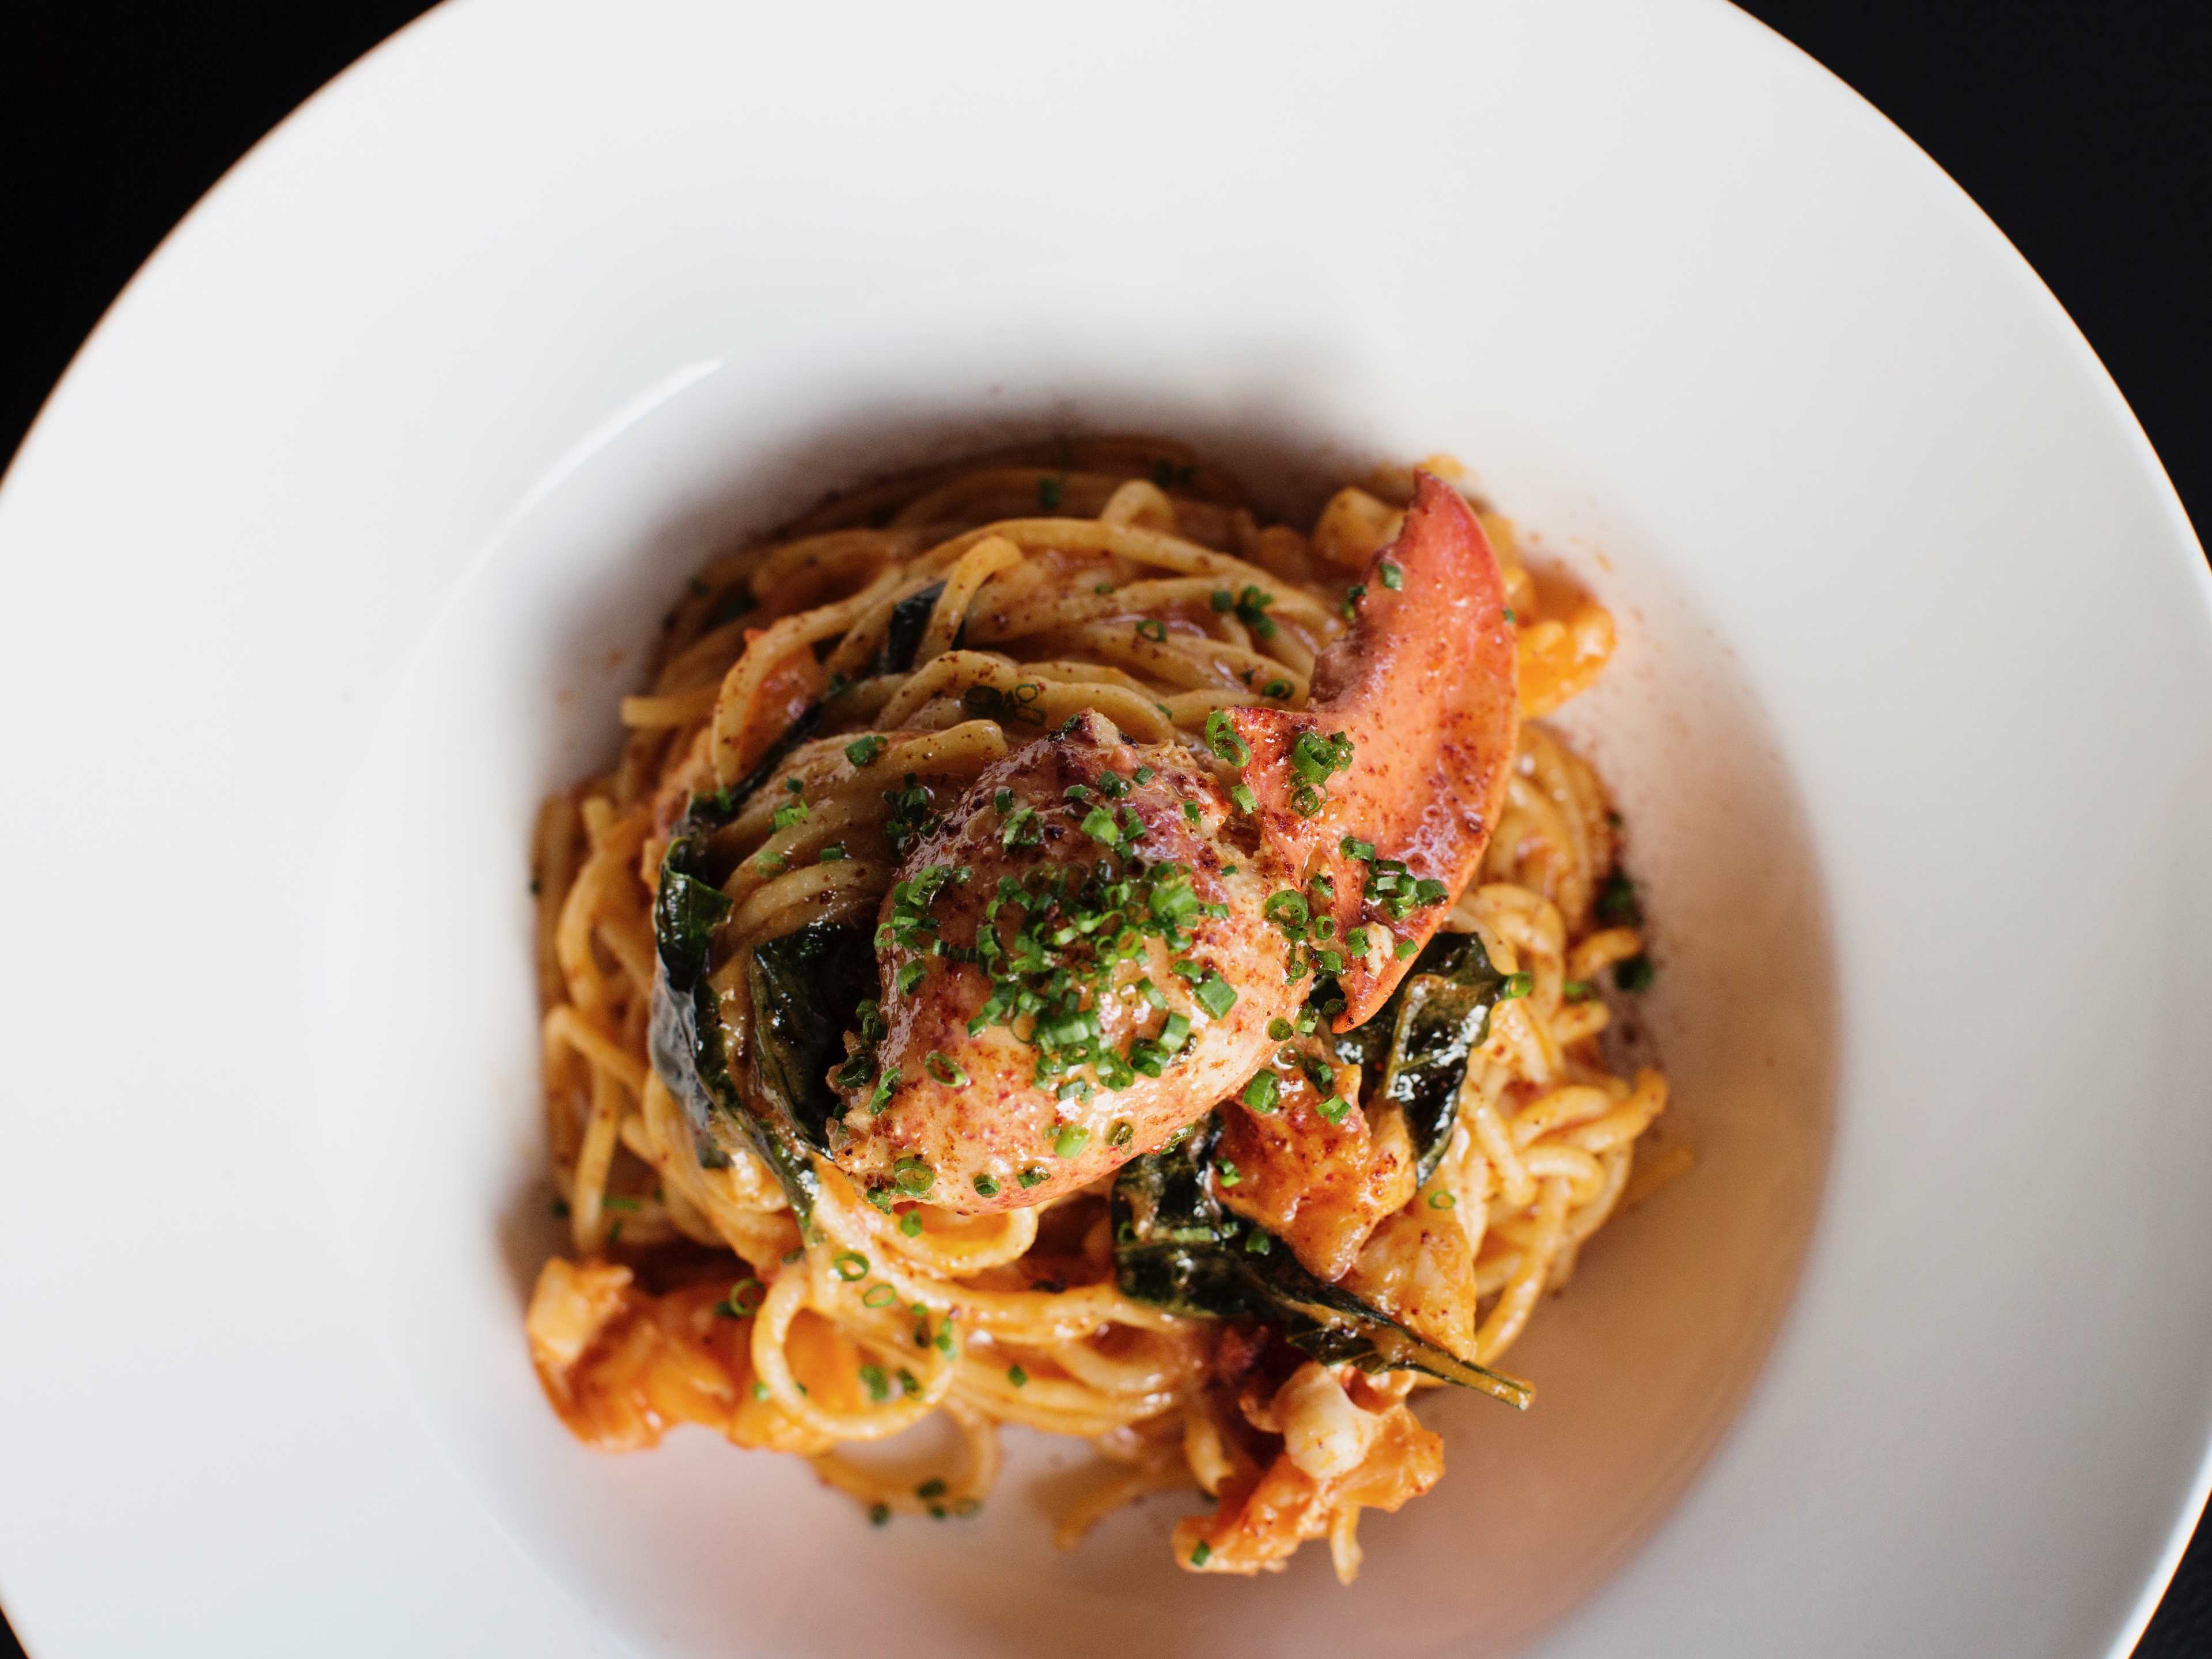 Lobster spaghetti topped with fresh herbs at Martina